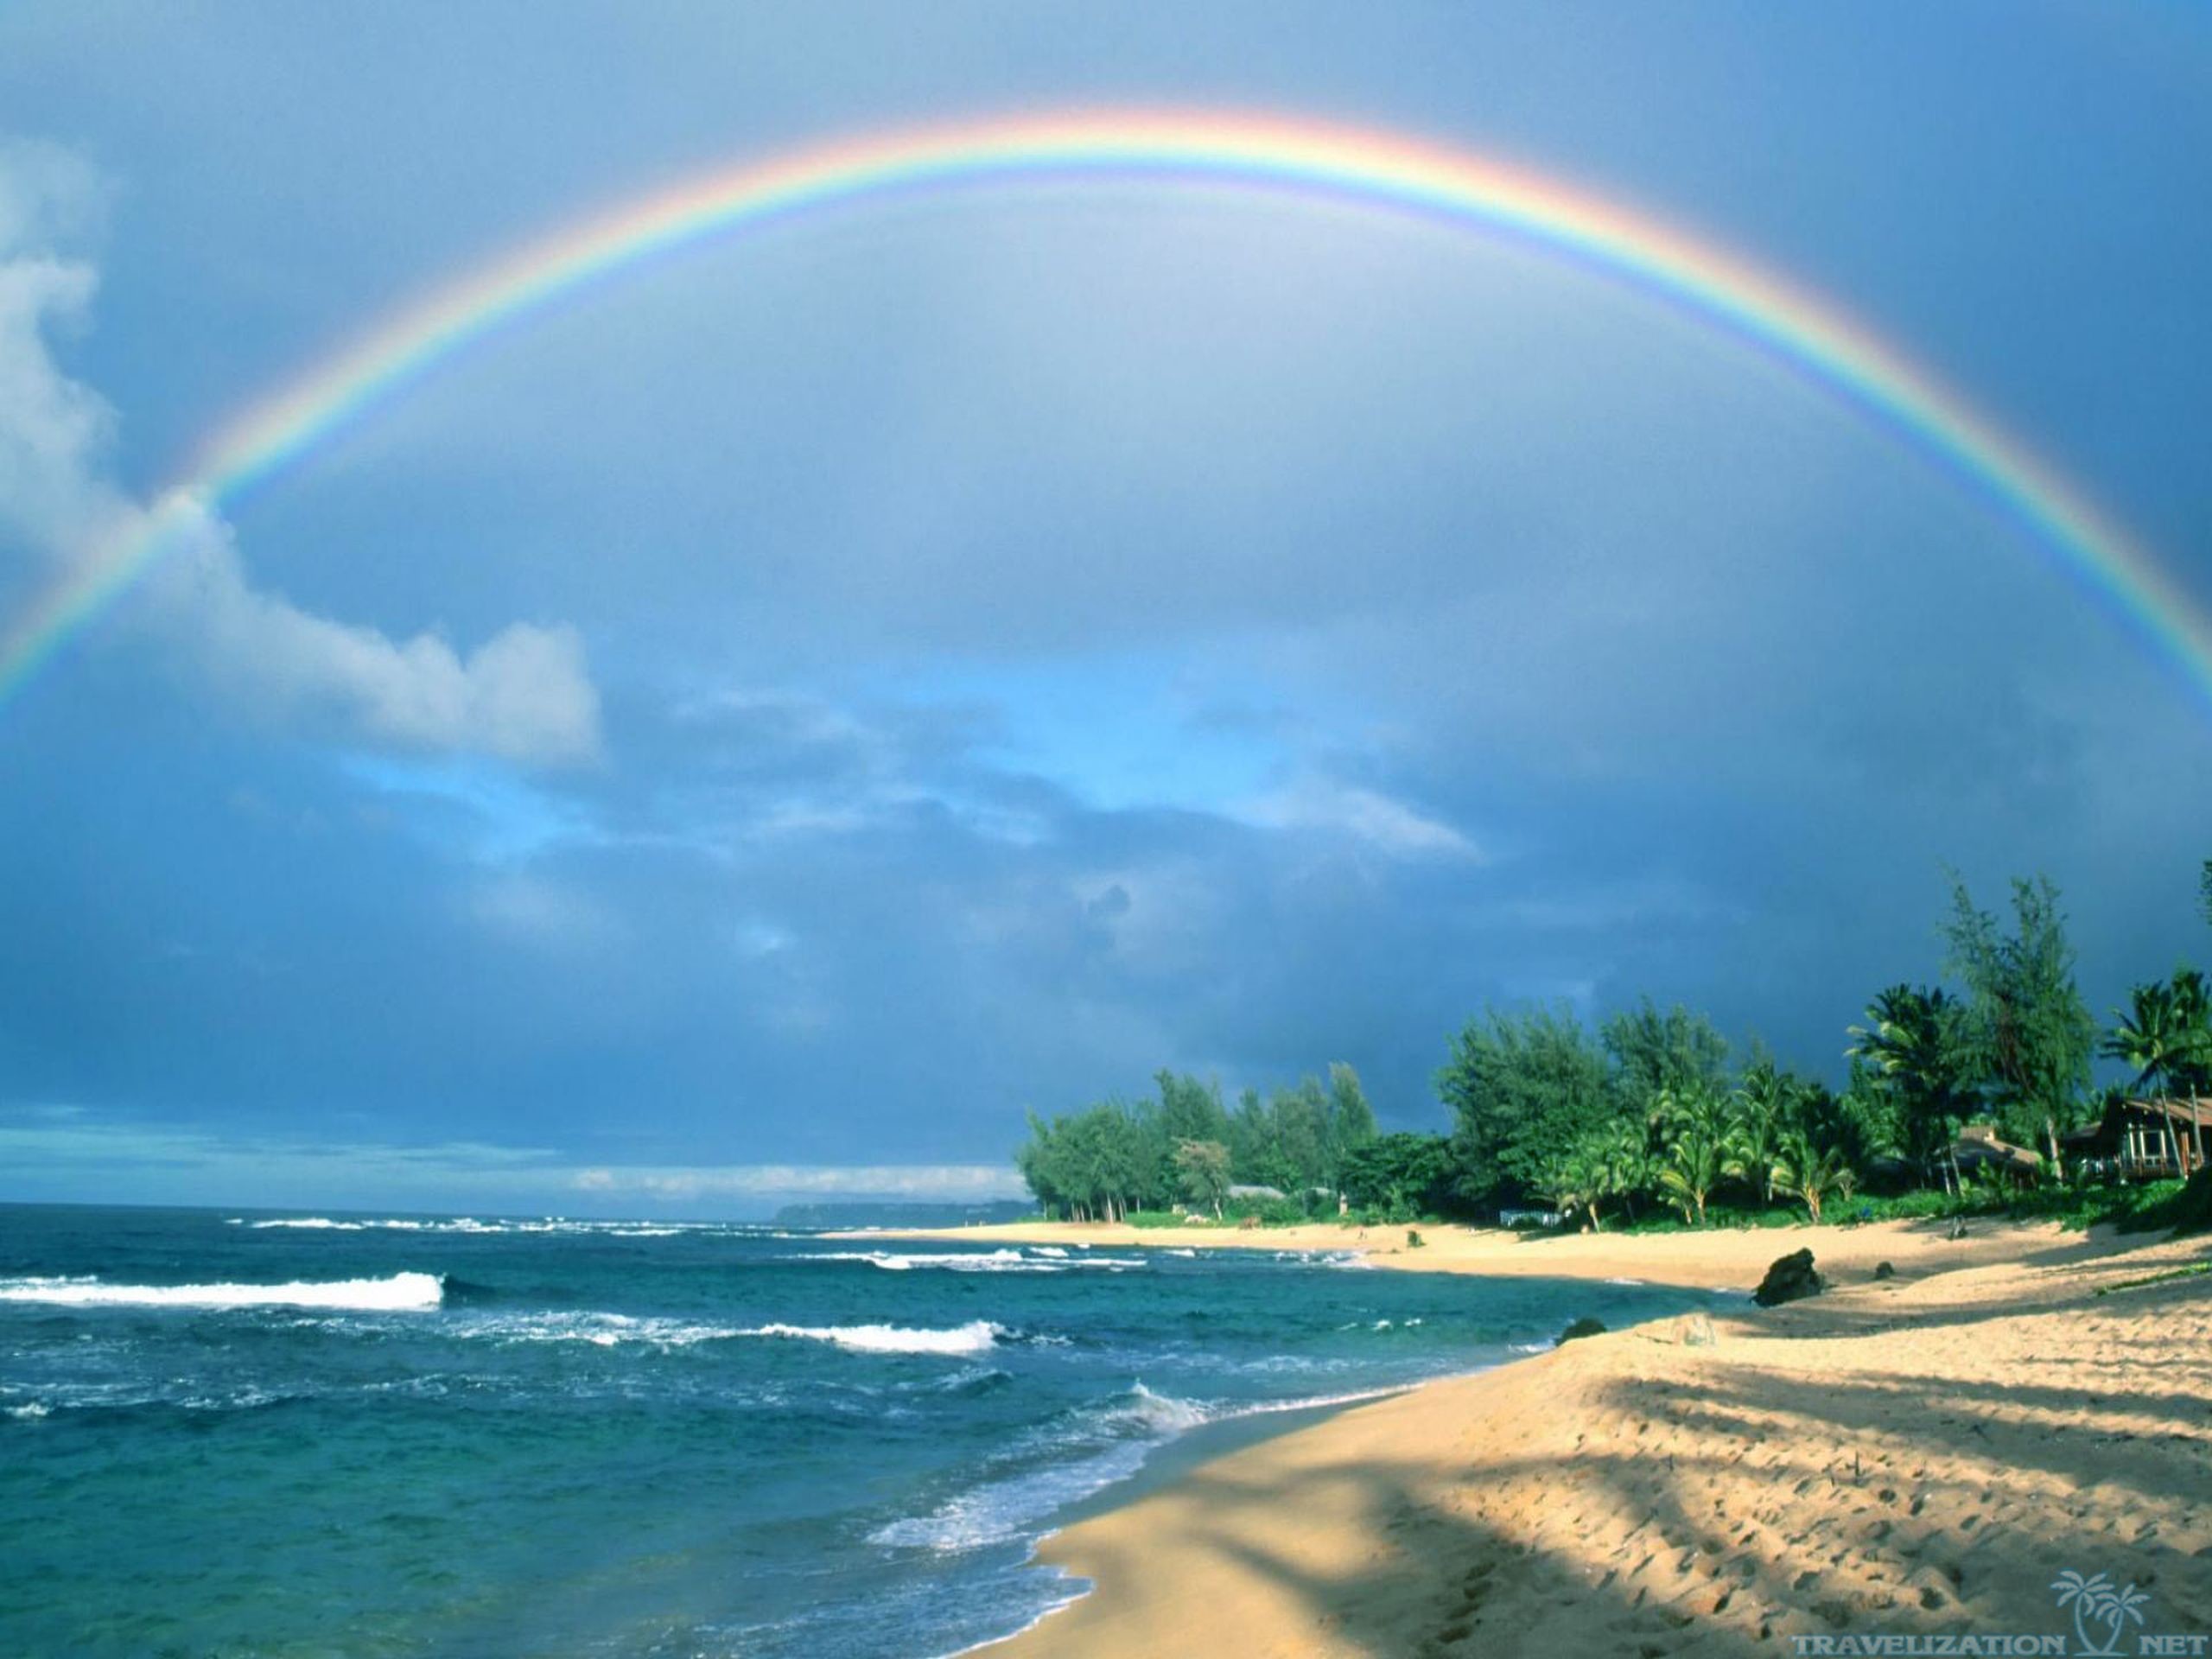 2560x1920 You can find Beautiful Rainbows Wallpapers in many resolution such as  1024Ã768, 1280Ã1024, 1366Ã768, 1920Ã1080 and ...